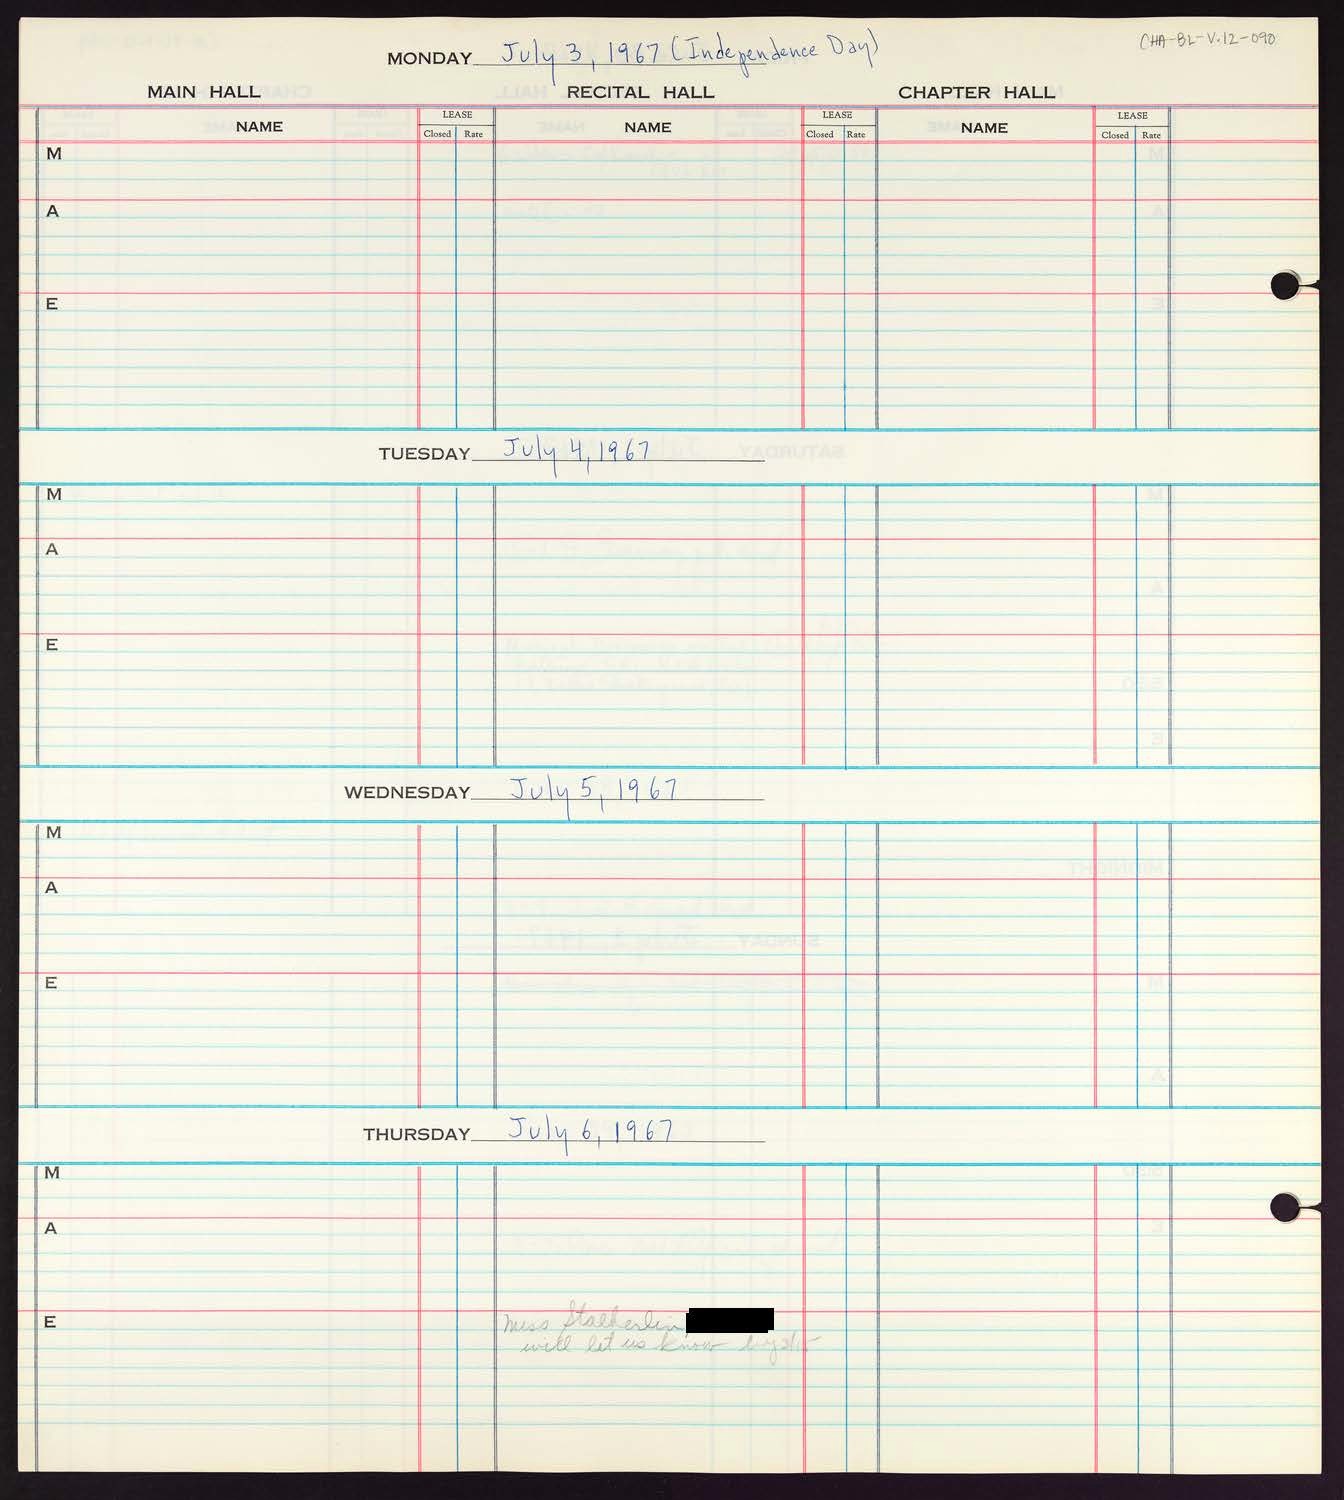 Carnegie Hall Booking Ledger, volume 12, page 90